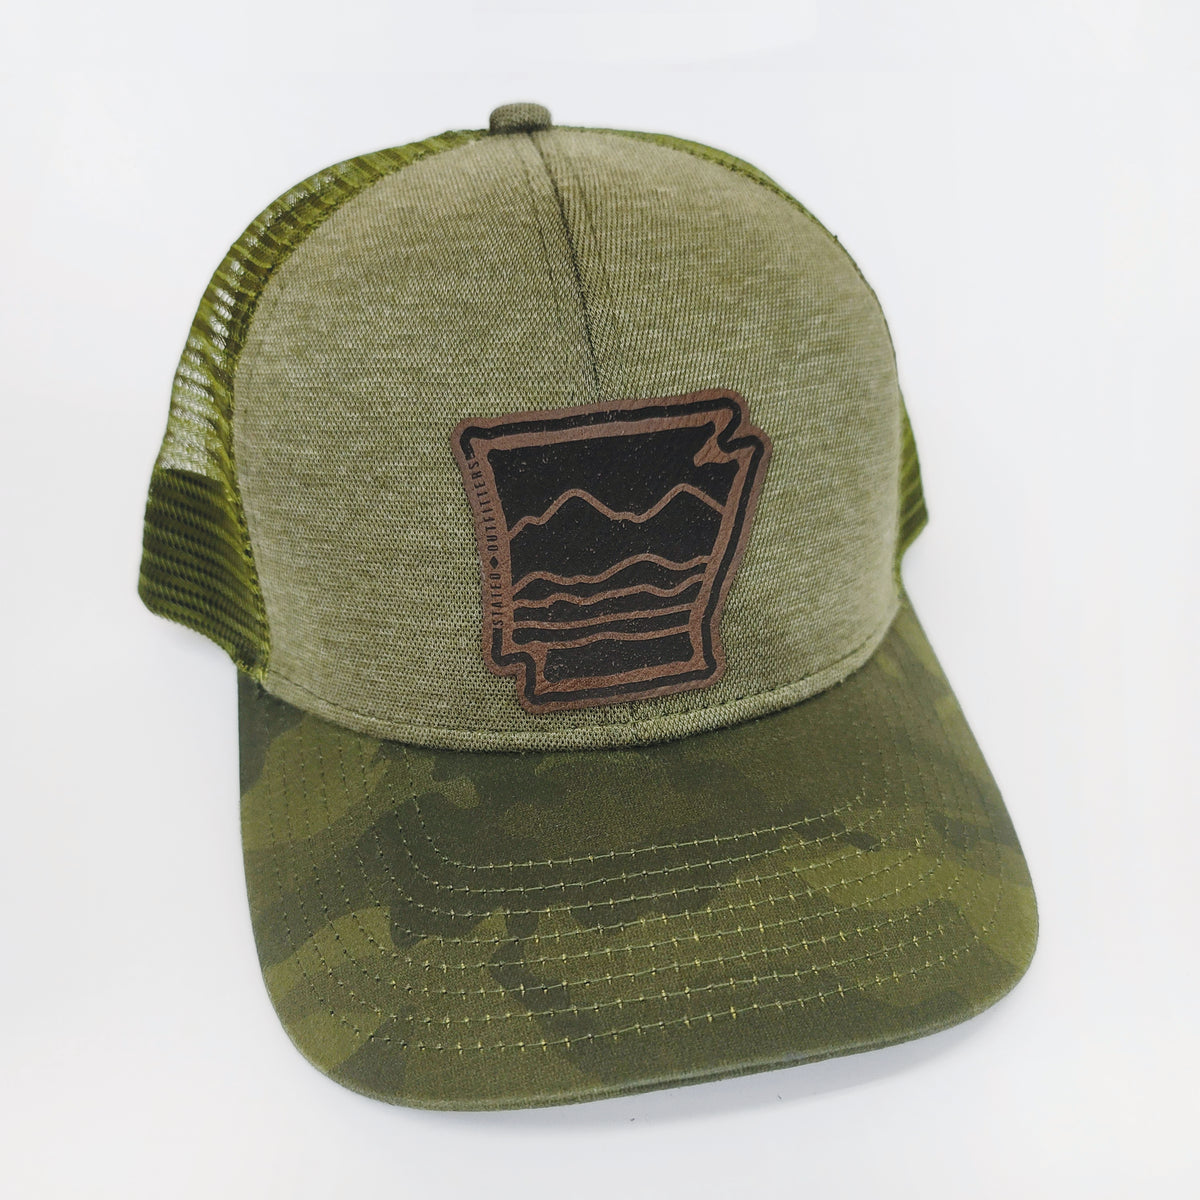 Stated Outfitters AR Patch Green Camo Hat